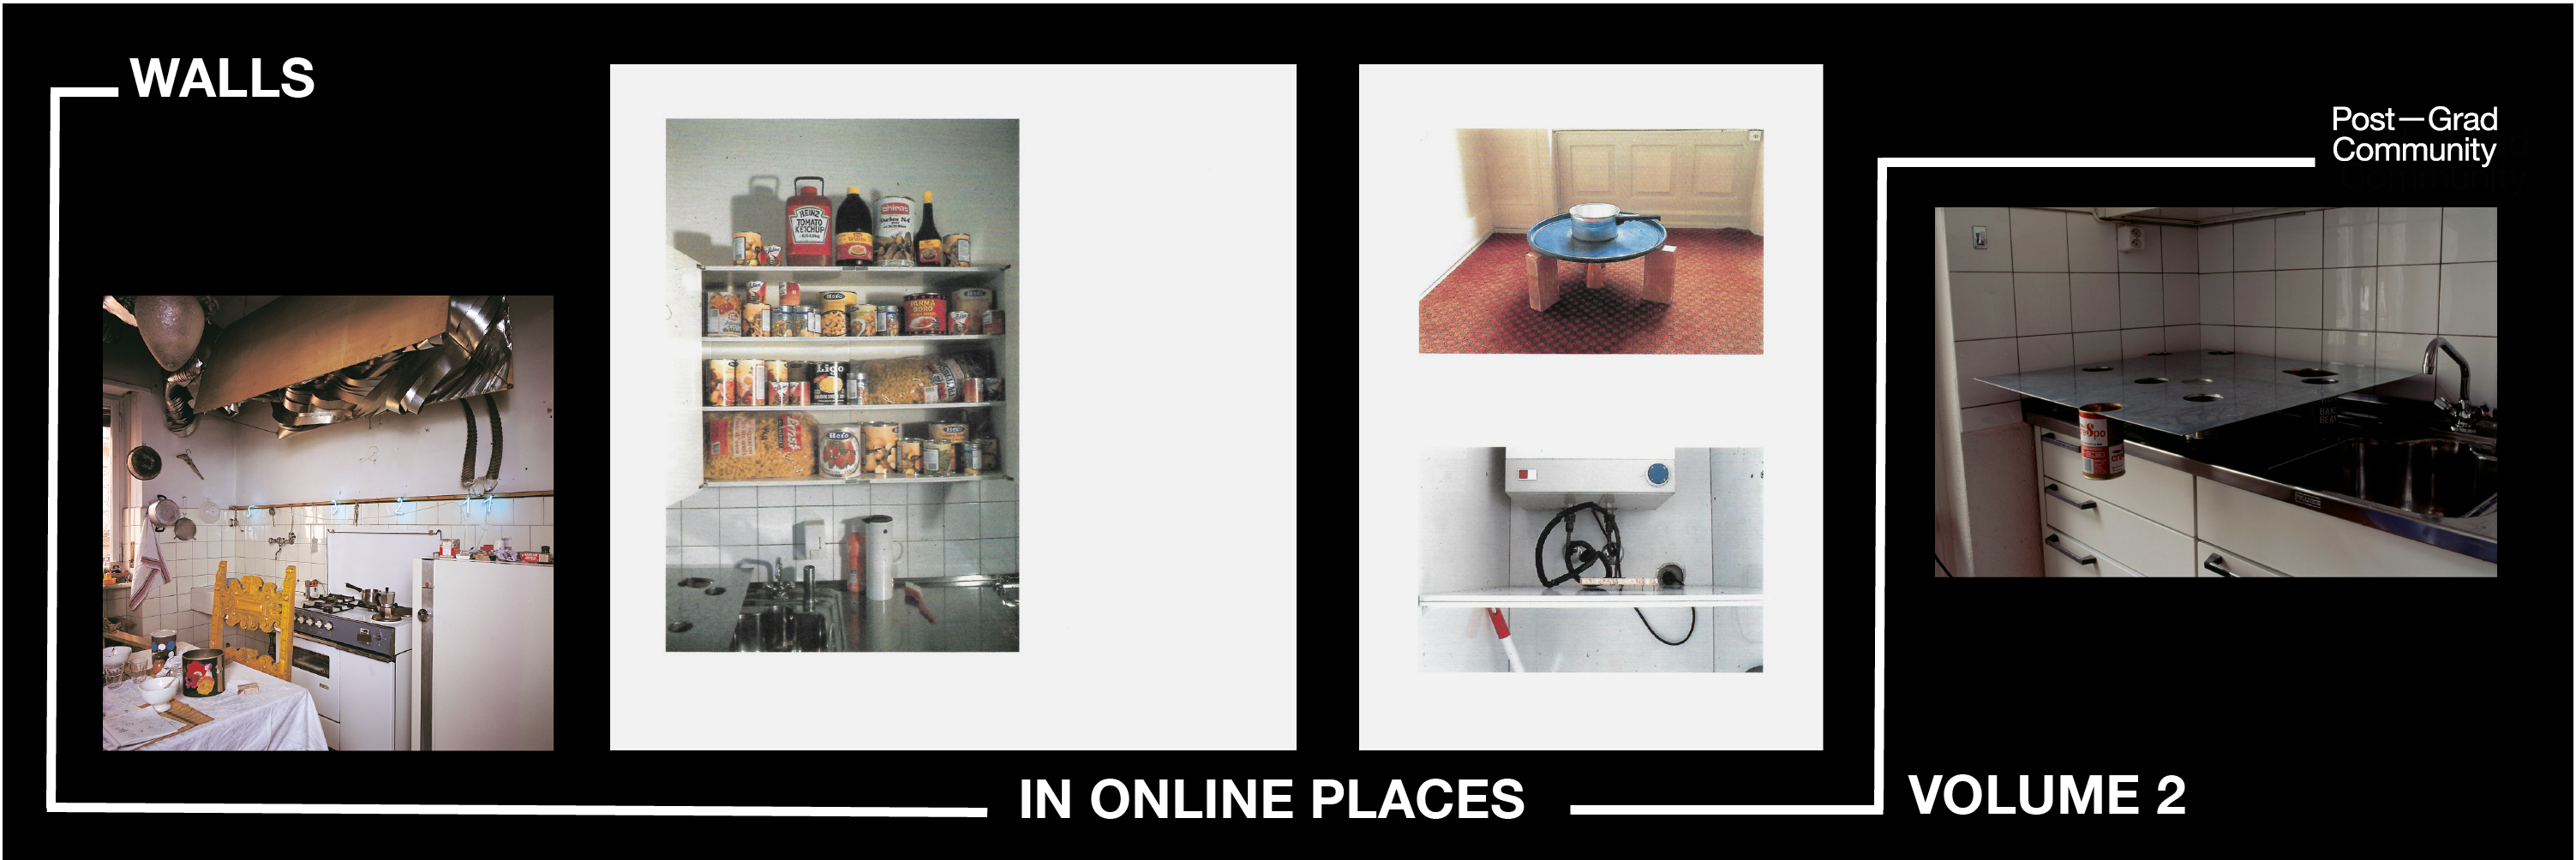 Walls in online places with a series of images from an exhibition set up in a 80s kitchen